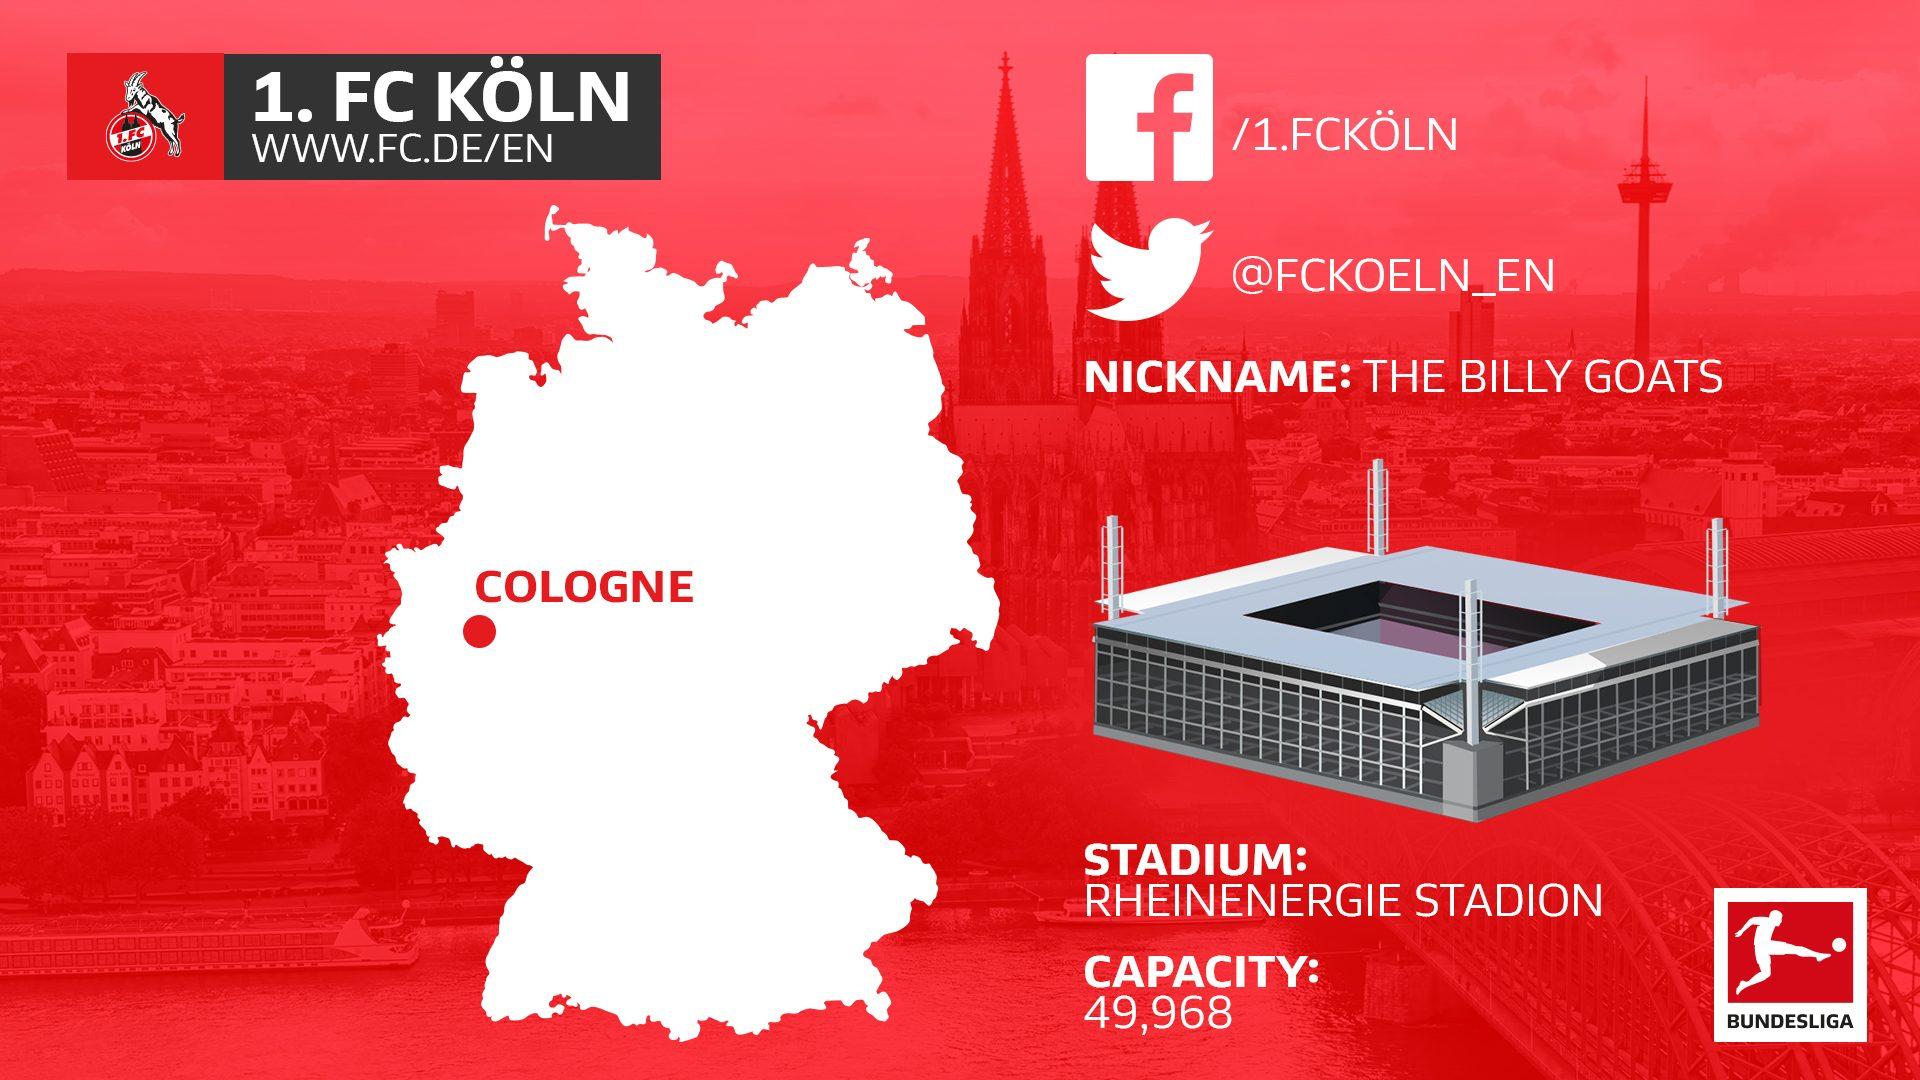 Bundesliga. Cologne Fanzone: Getting to know the Bundesliga's first